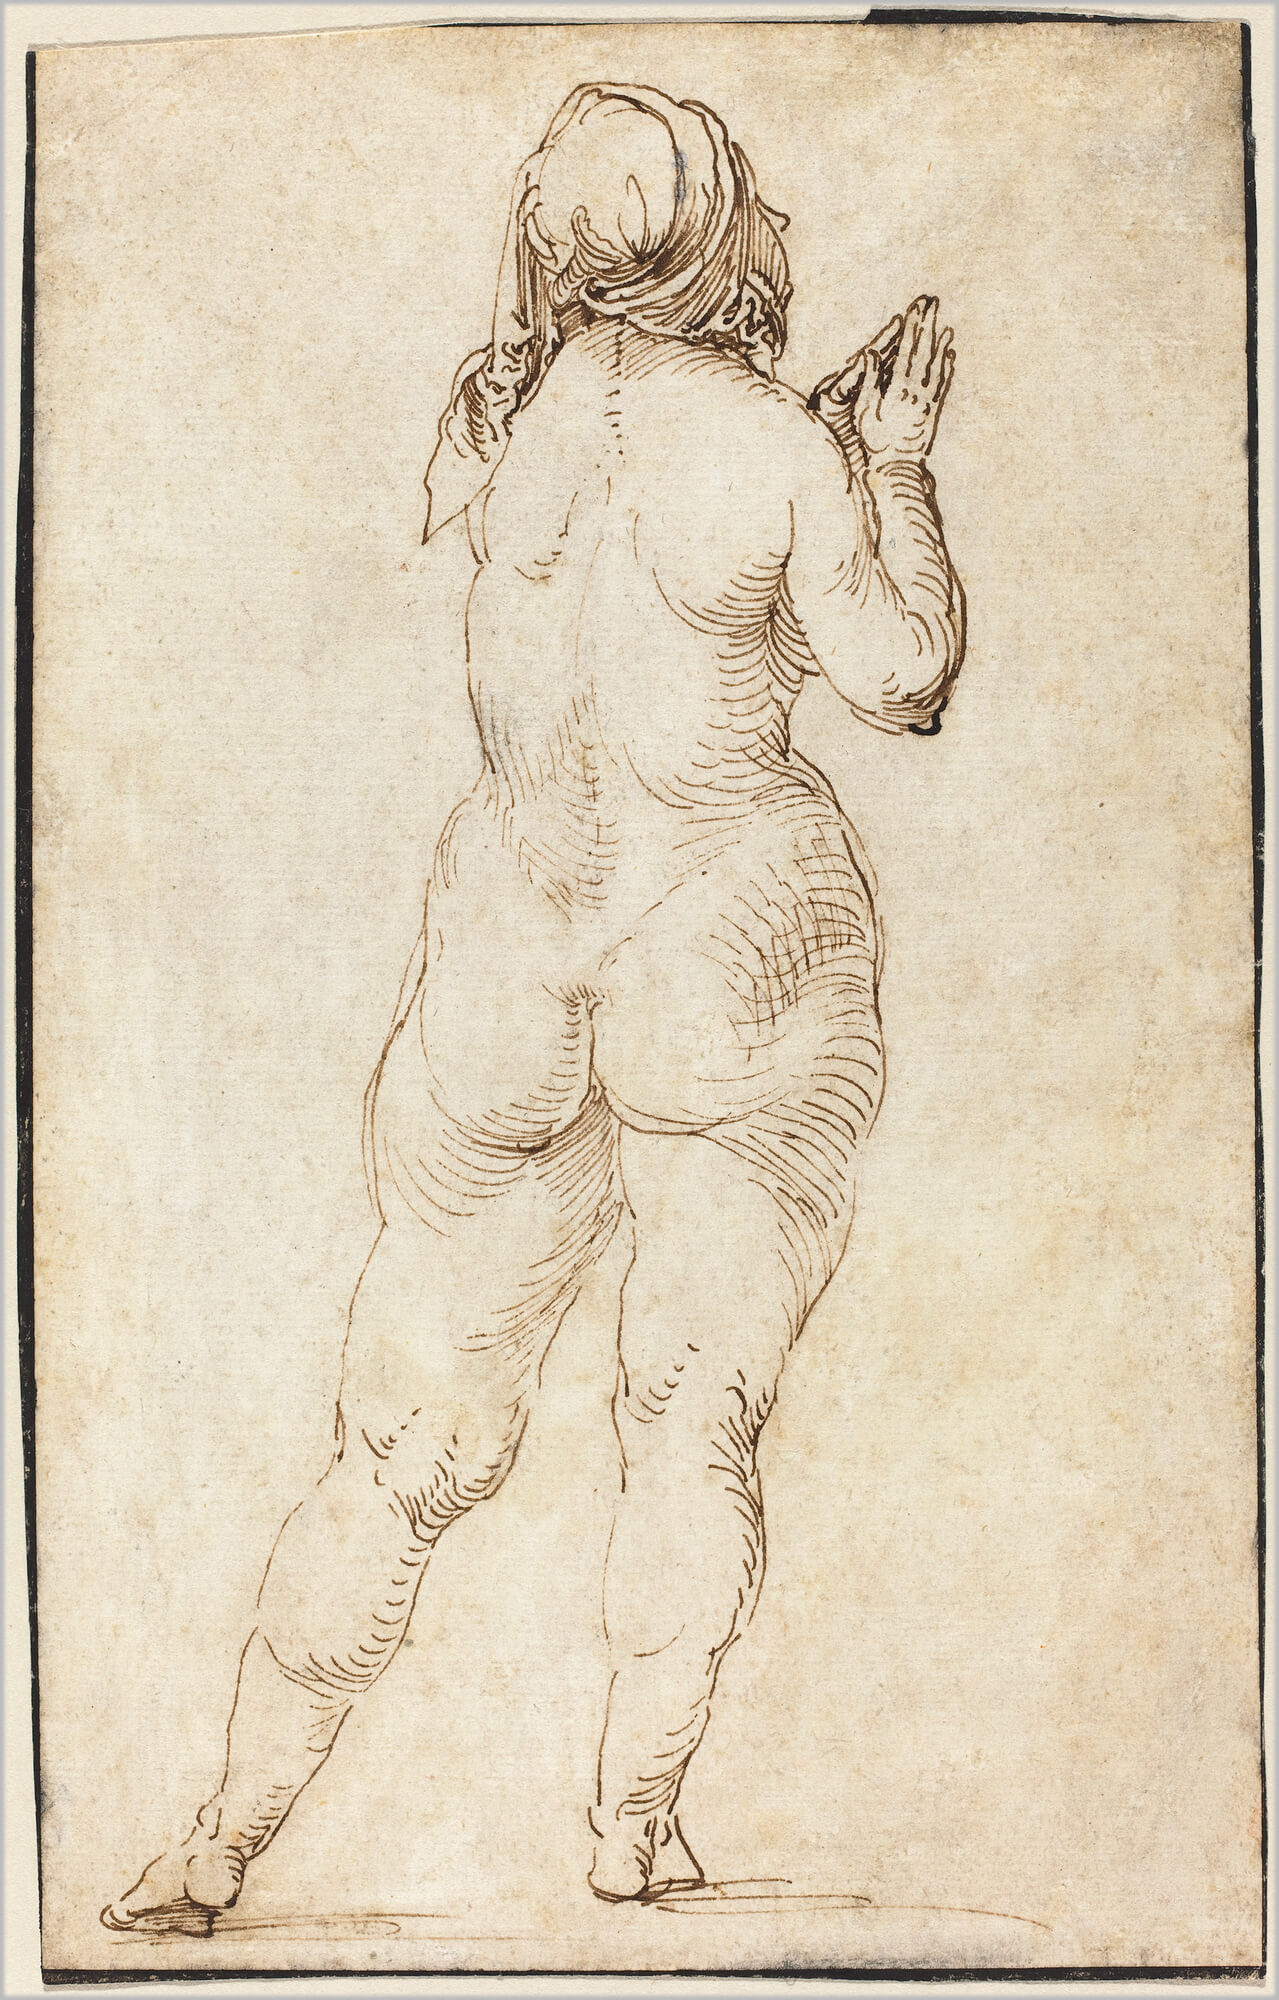 Albrecht Dürer, Female Nude Praying, c. 1500, pen and brown ink on laid paper; 21.5 × 13.6 cm (National Gallery of Art, Washington, DC)